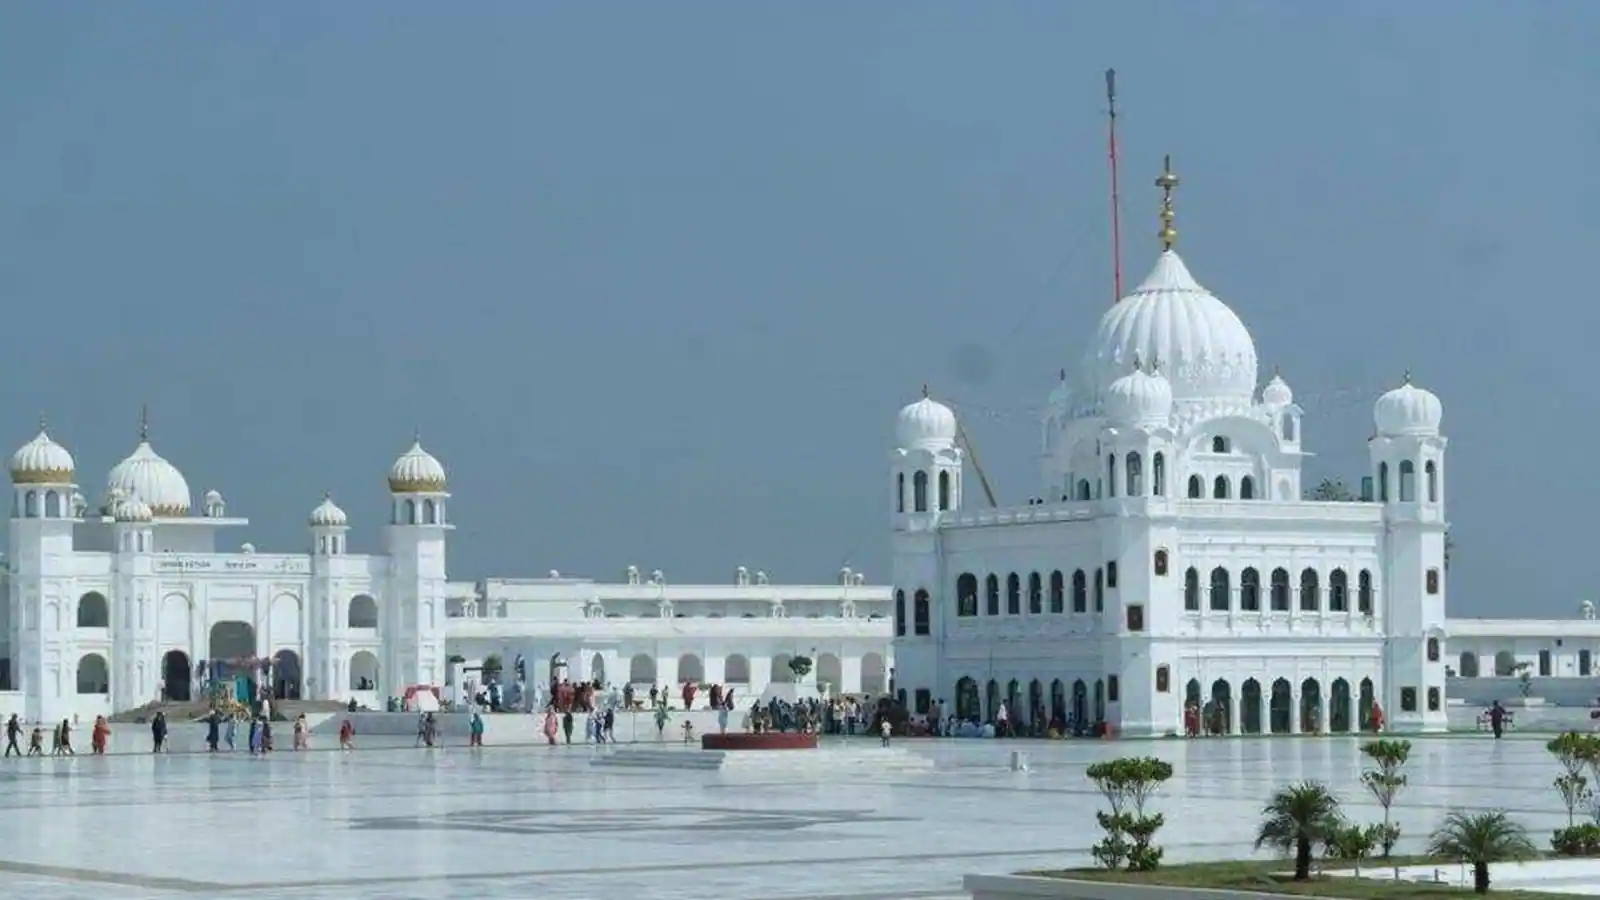 The Kartarpur Corridor has a lengthy and complicated history dating back to 1947